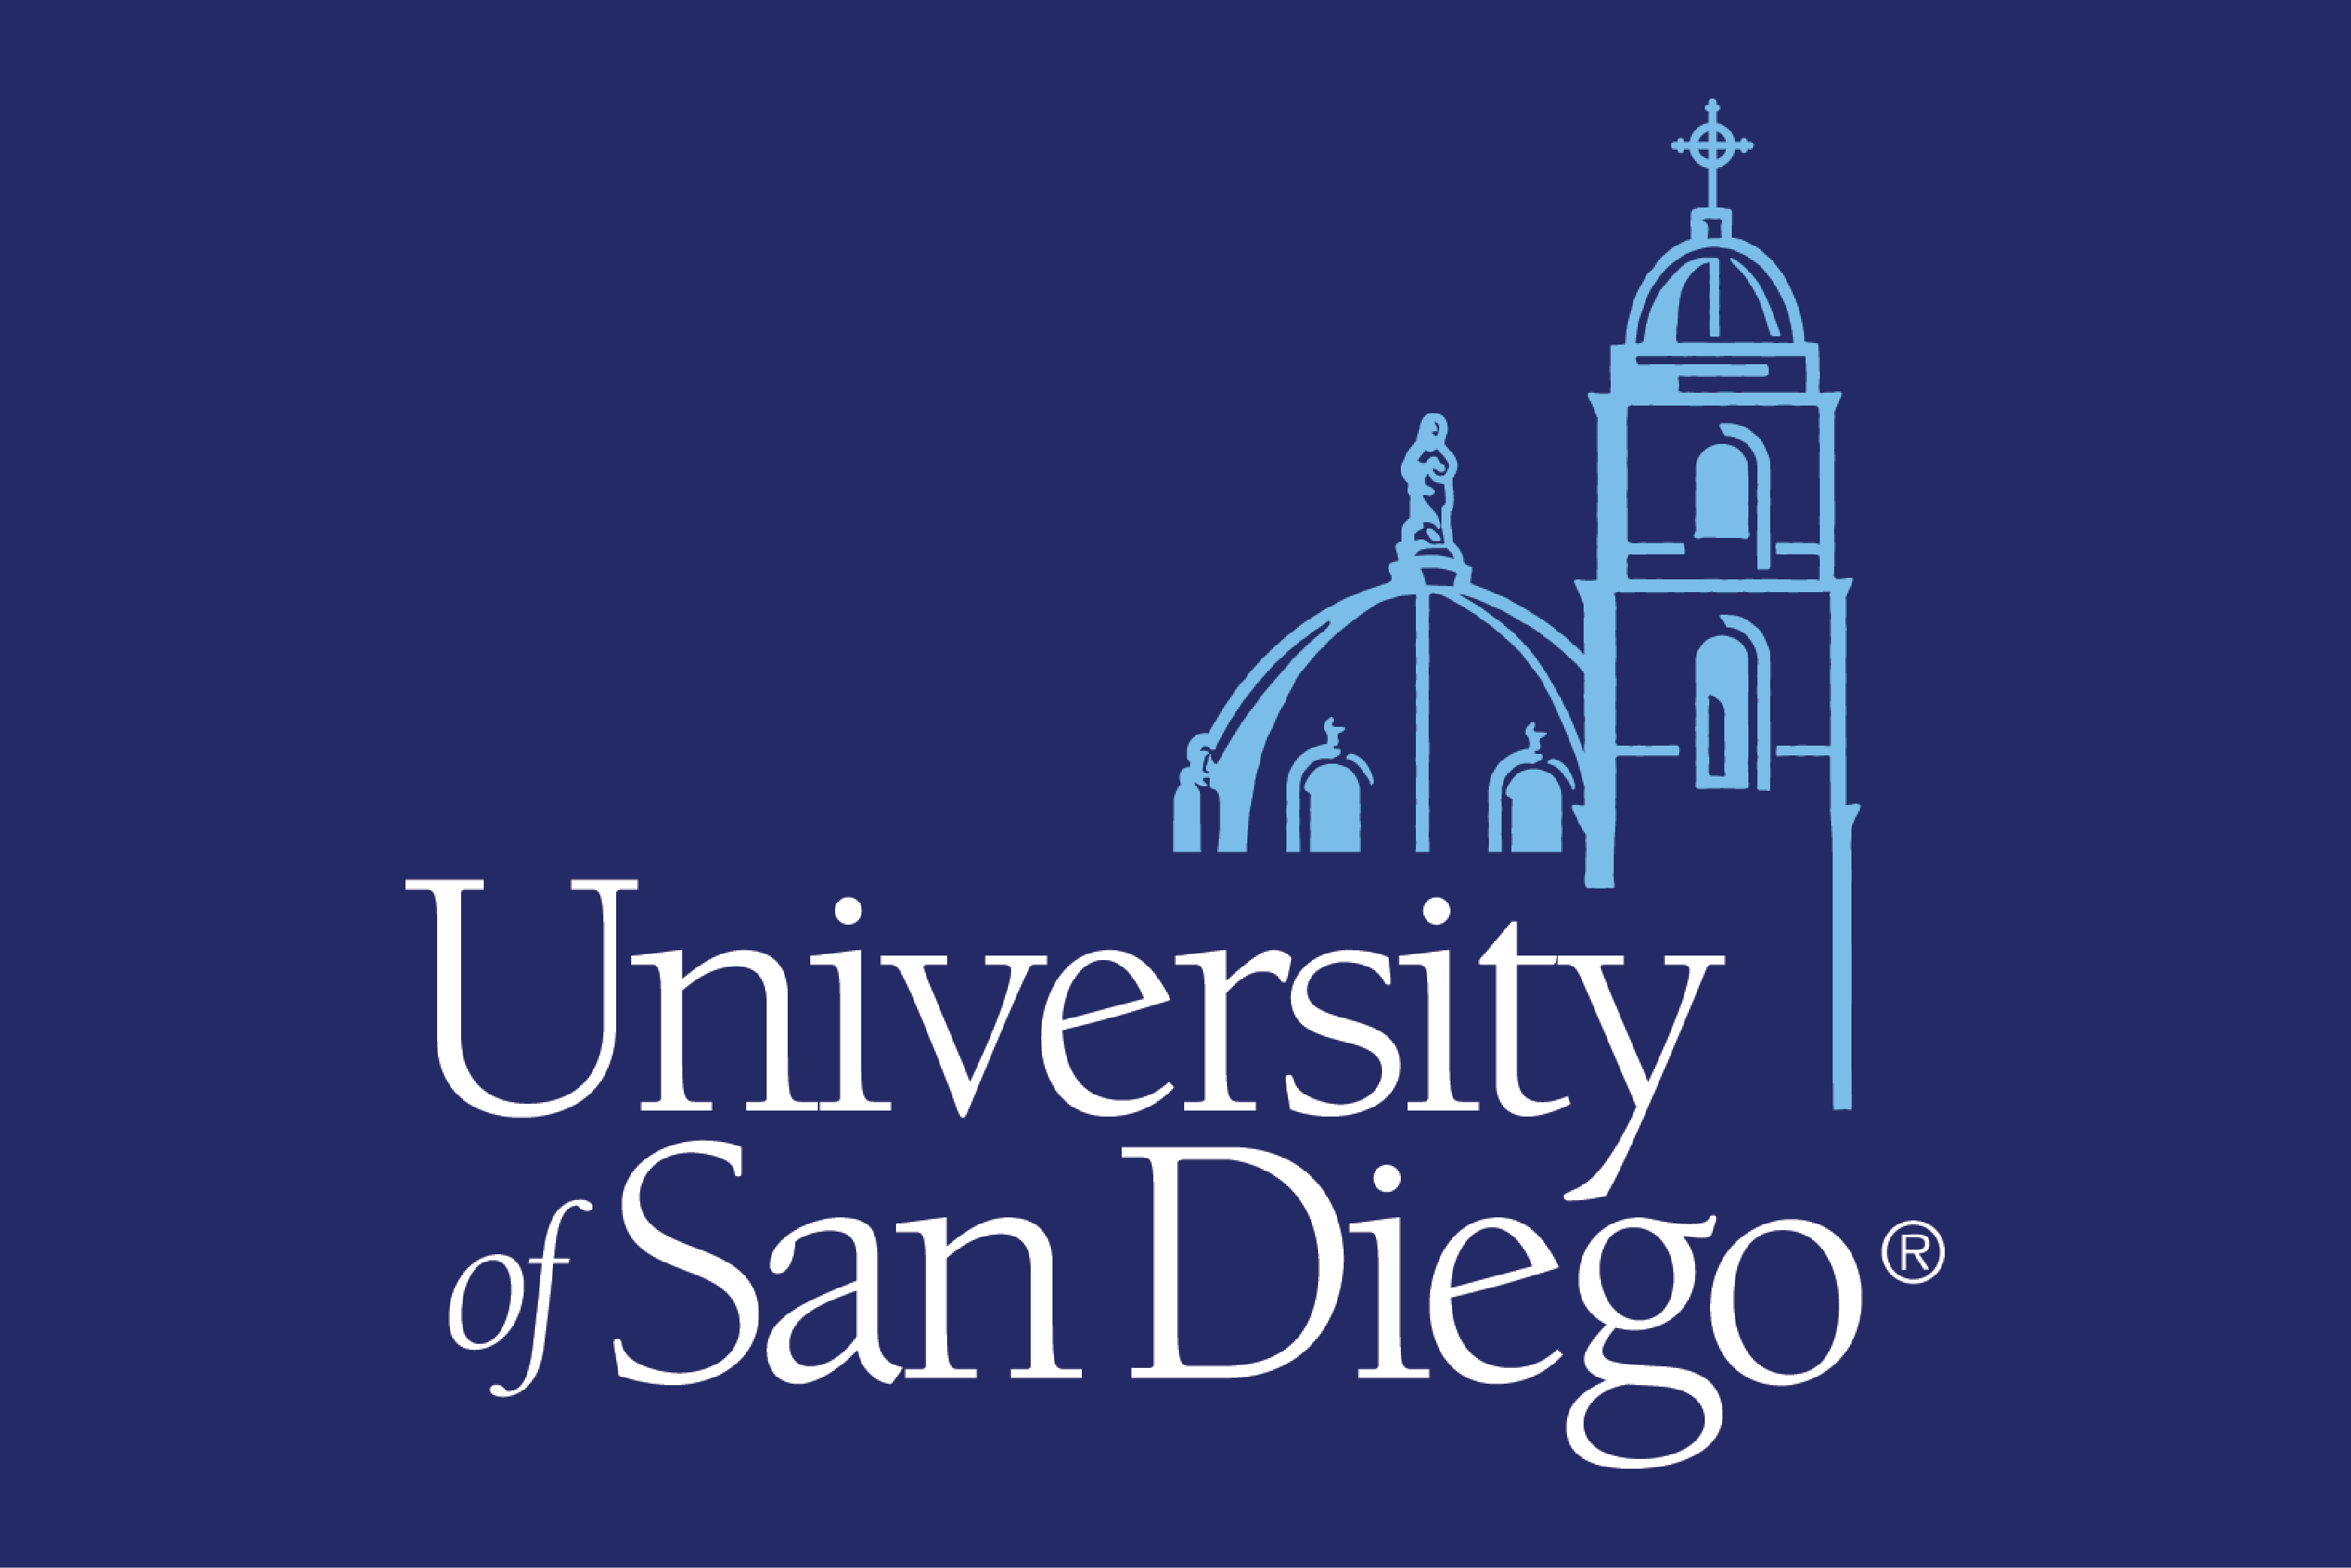 FlowCam for Undergraduate Research & Teaching: A Conversation with the University of San Diego